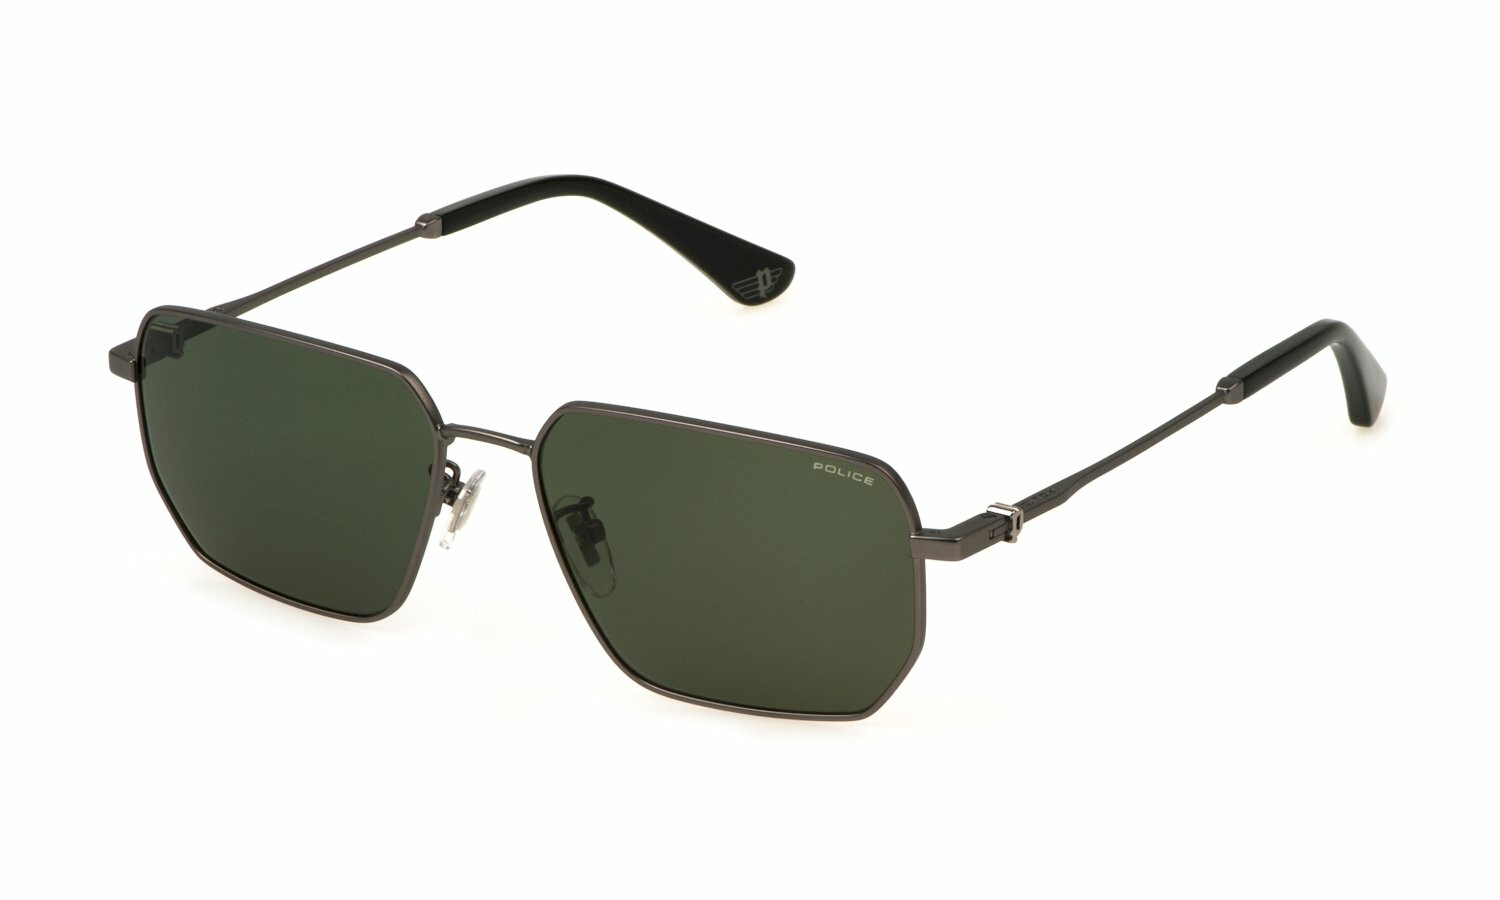 [products.image.front] Police FORCE 7 SPLN40 E56K Sonnenbrille